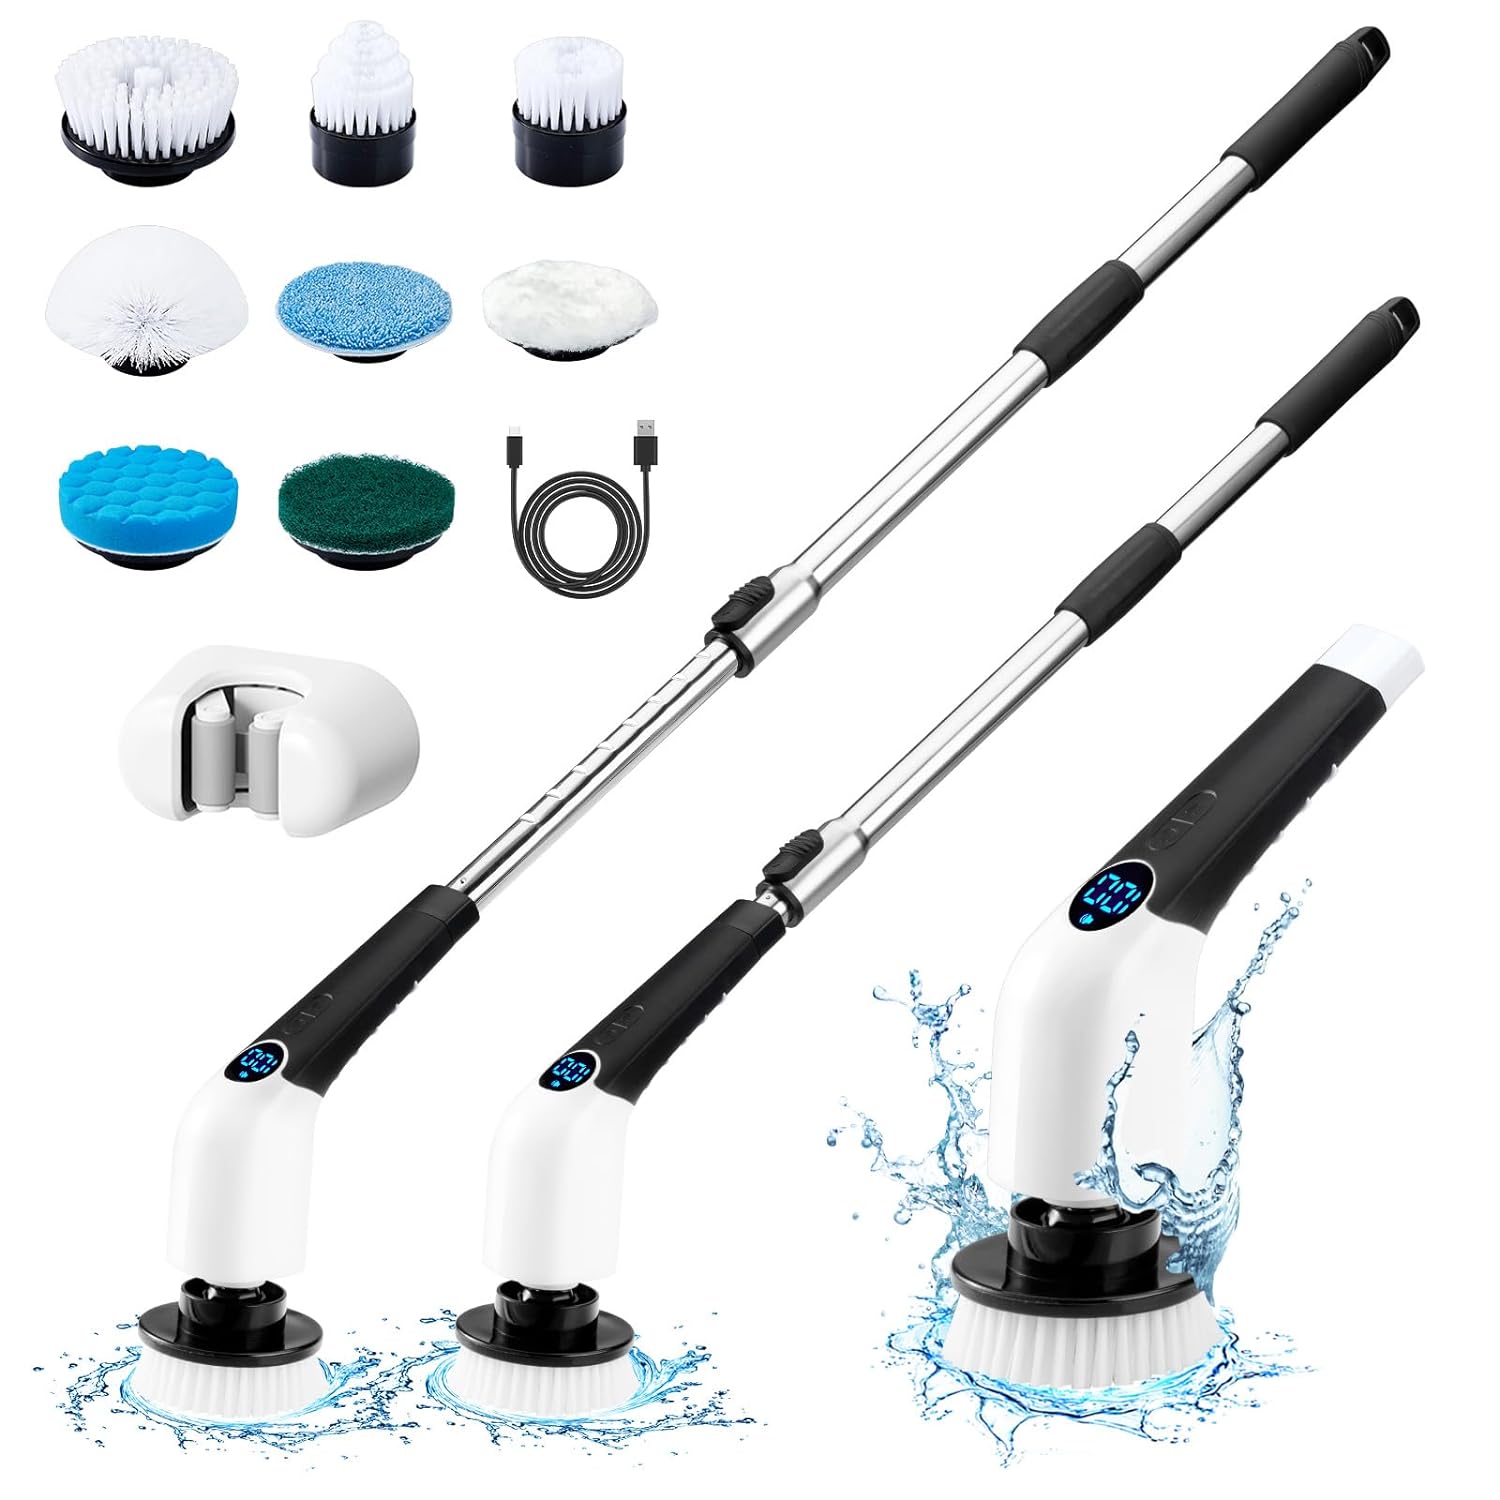 Electric Spin Scrubber, Cordless Cleaning Brush with 8 Replaceable Brush Heads, Power Shower Scrubber Long Handle Extendable Handheld Electric Scrubber for Bathroom Floor Tub Tile